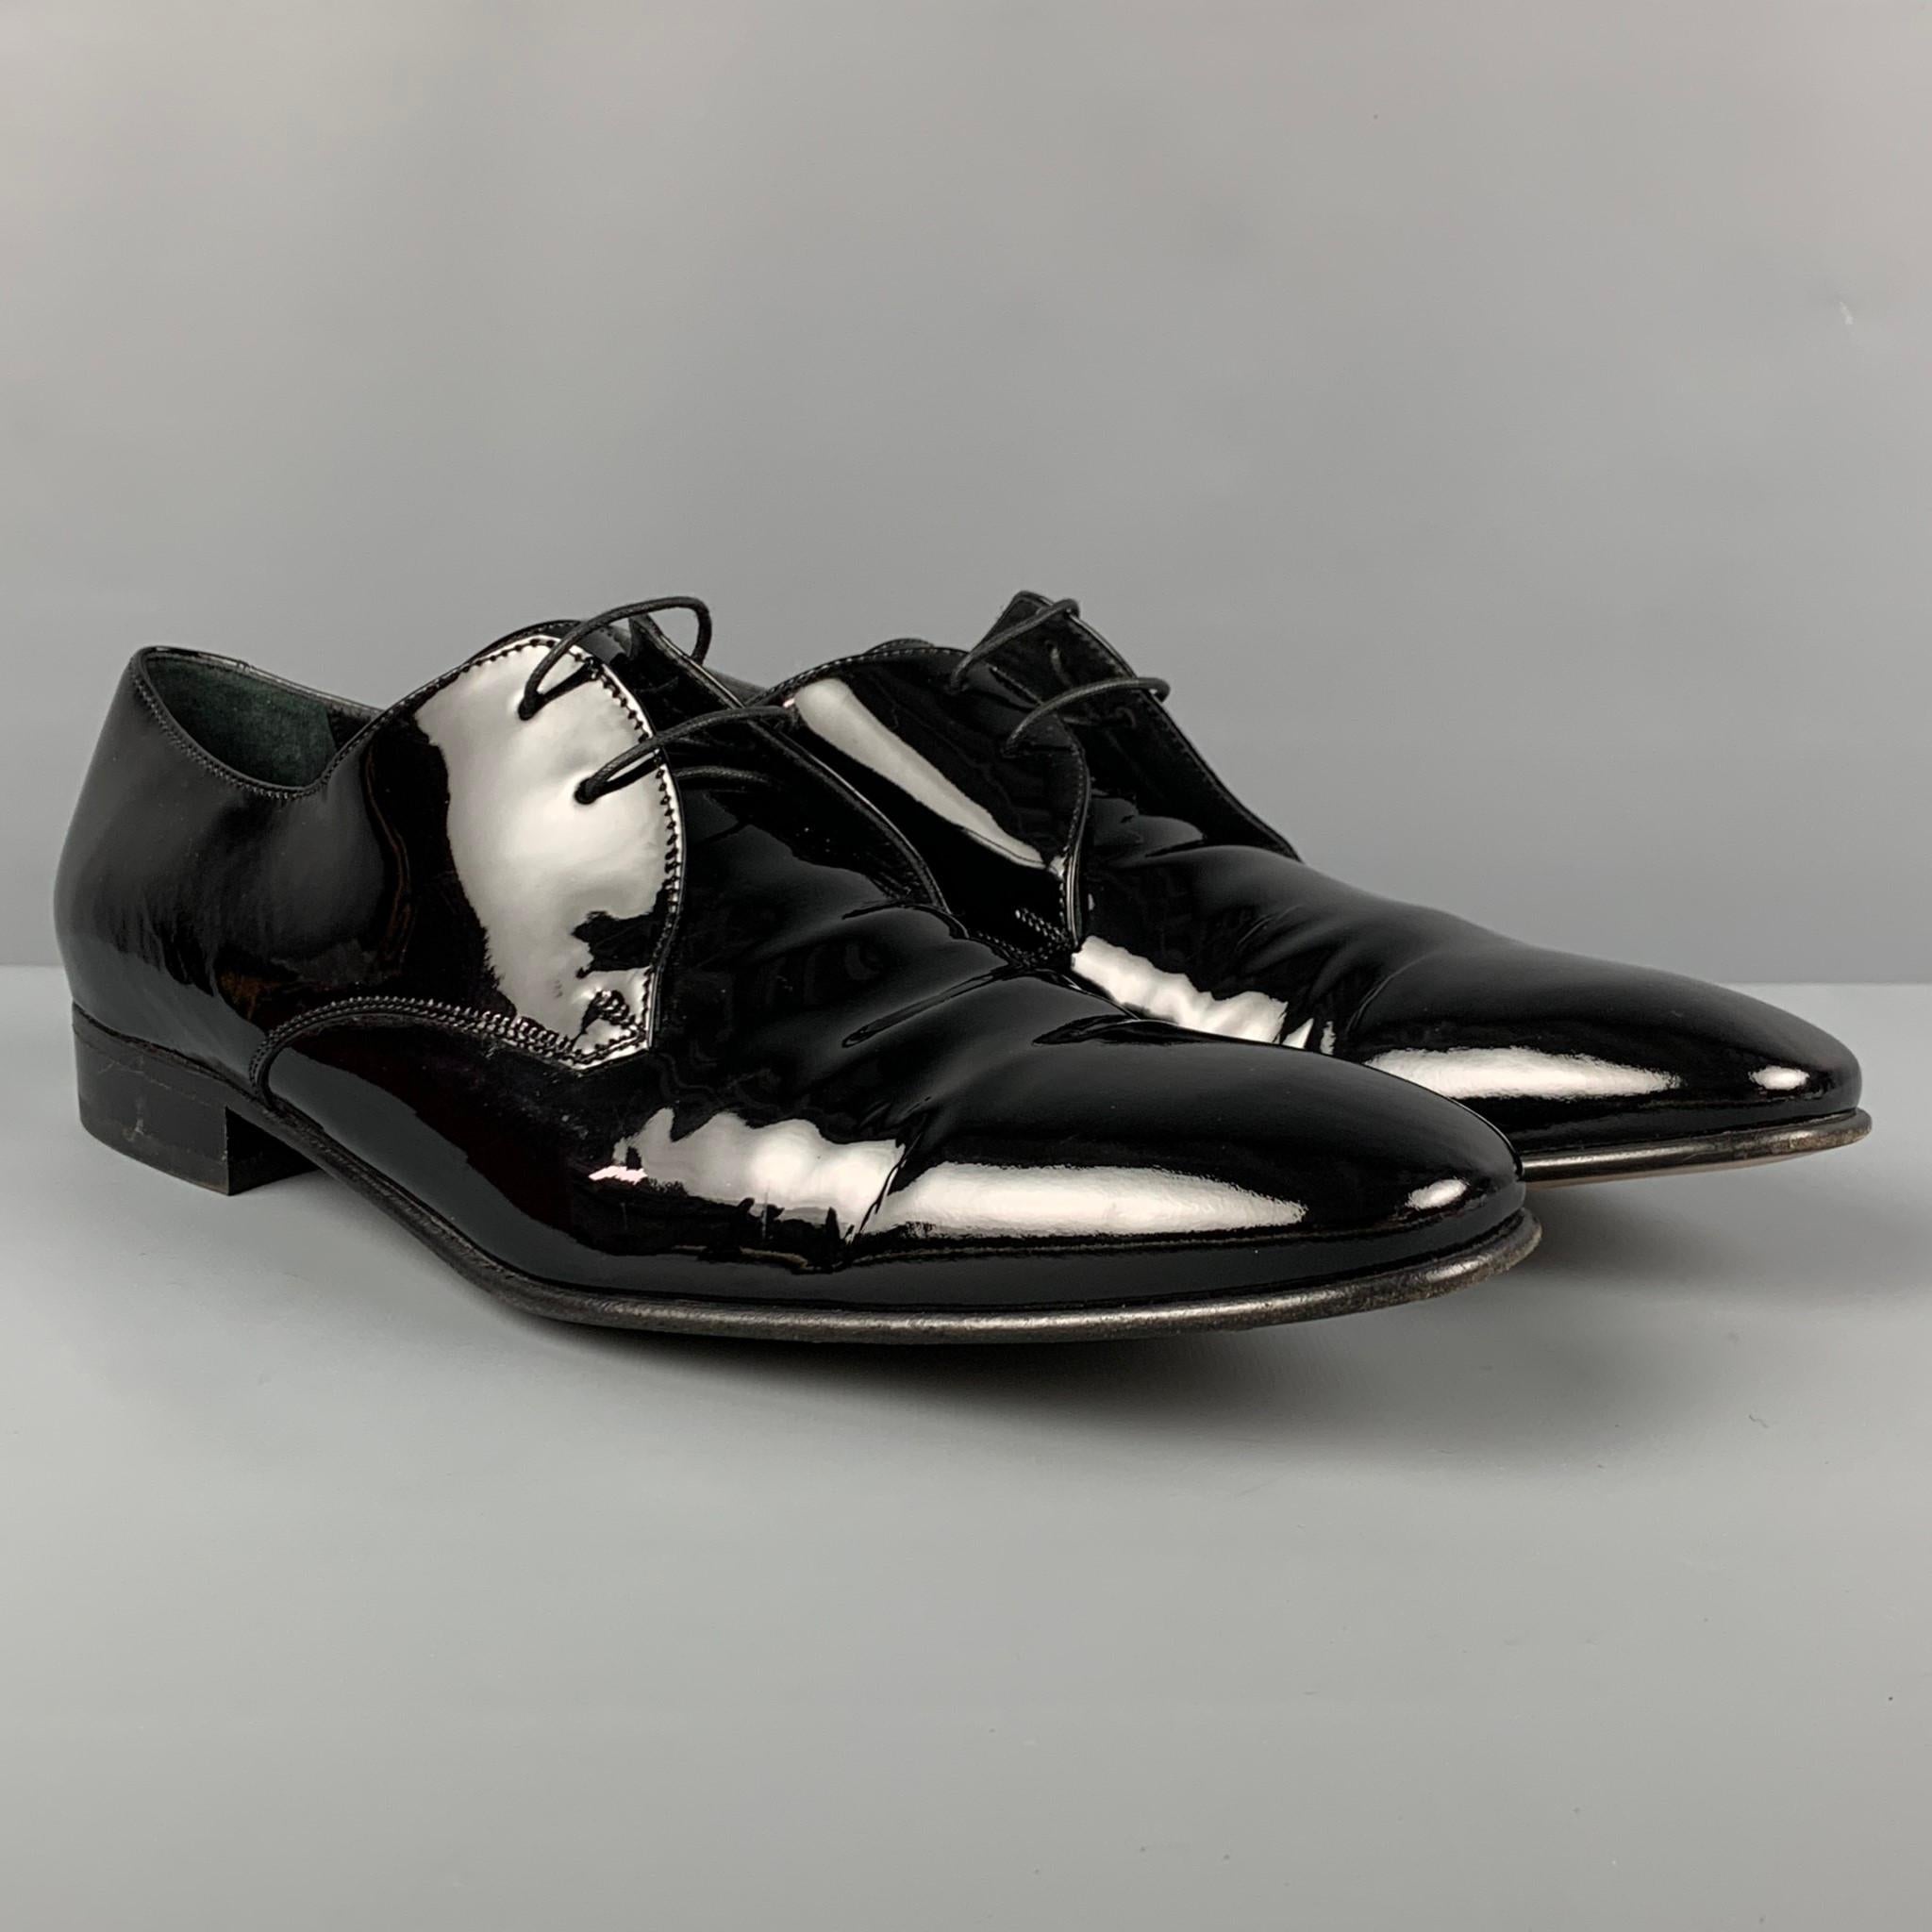 SALVATORE FERRAGAMO shoes comes in black patent leather featuring a square toe and a lace up closure. Made in Italy. 

Very Good Pre-Owned Condition.
Marked: 31 VF 20082 15 11 11D

Outsole: 12.5 in. x 4 in. 